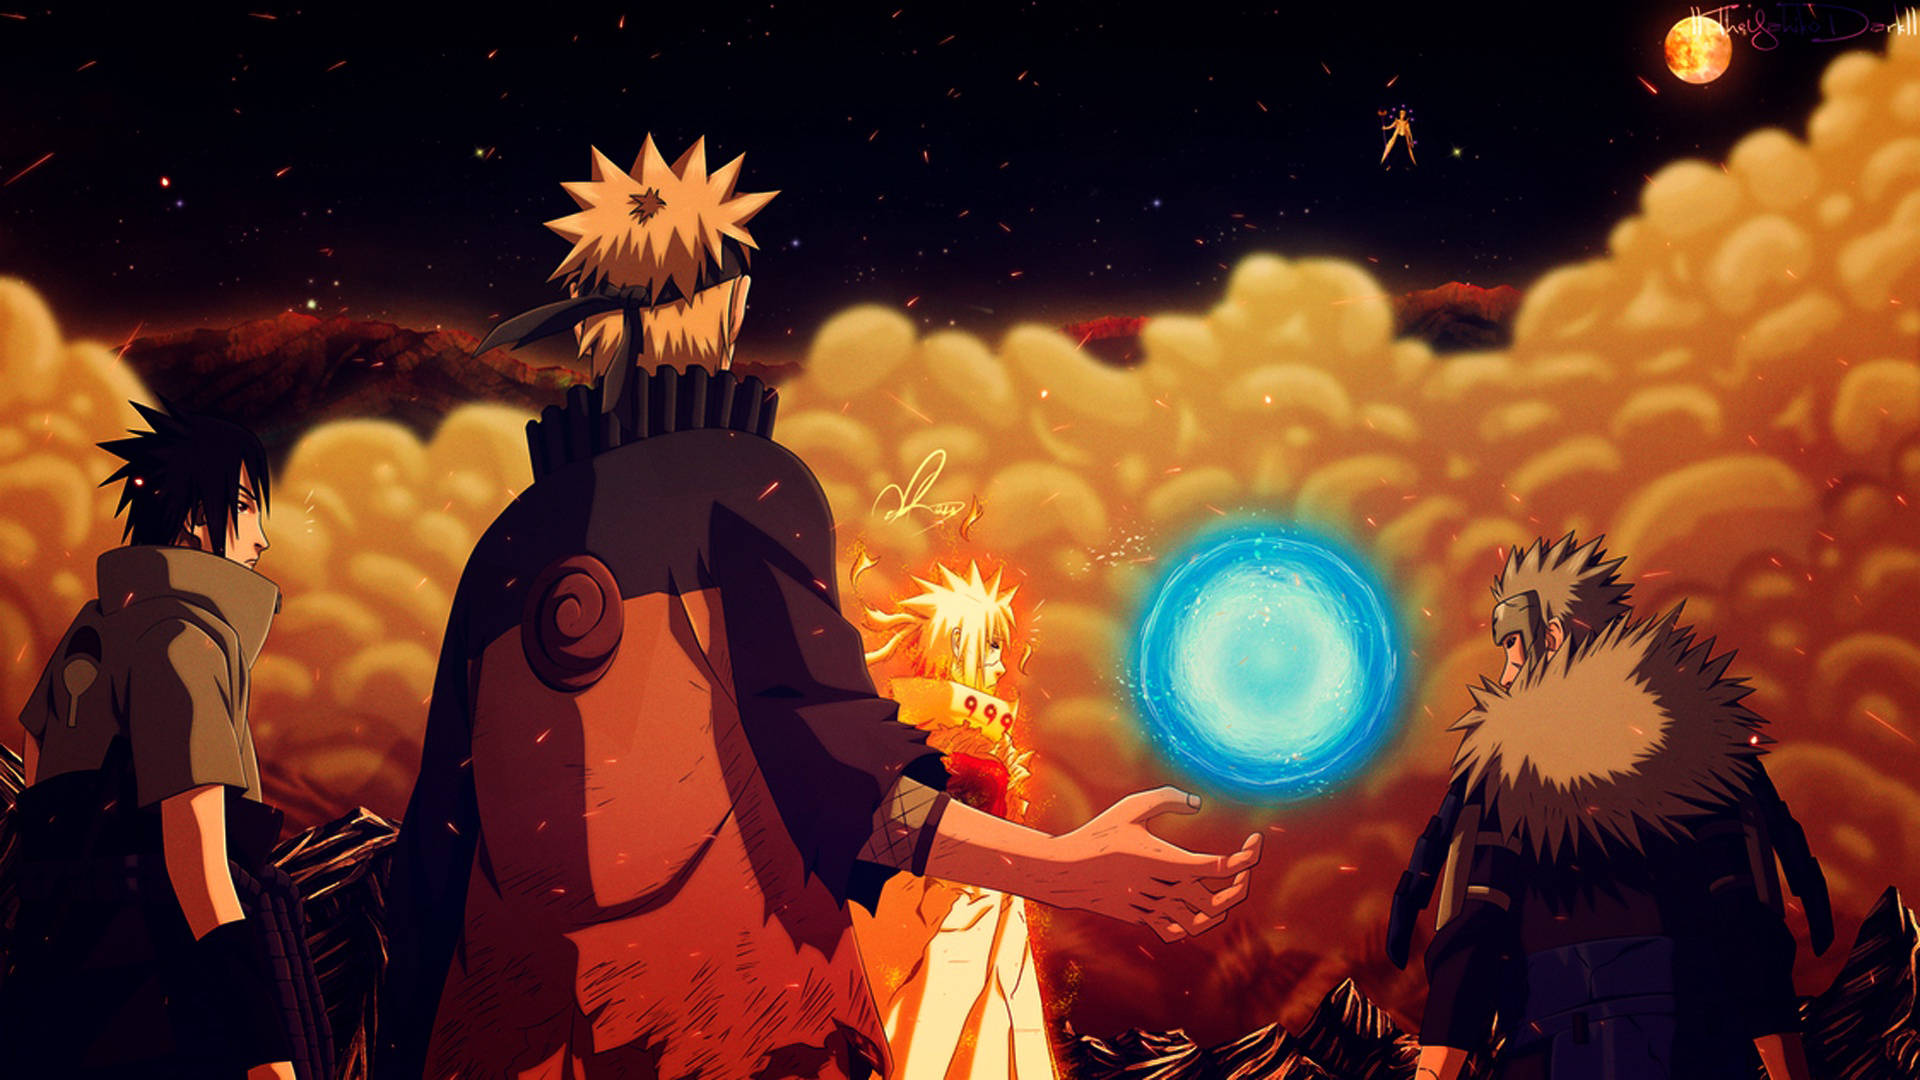 Coolest Naruto With Glowing Light Wallpaper